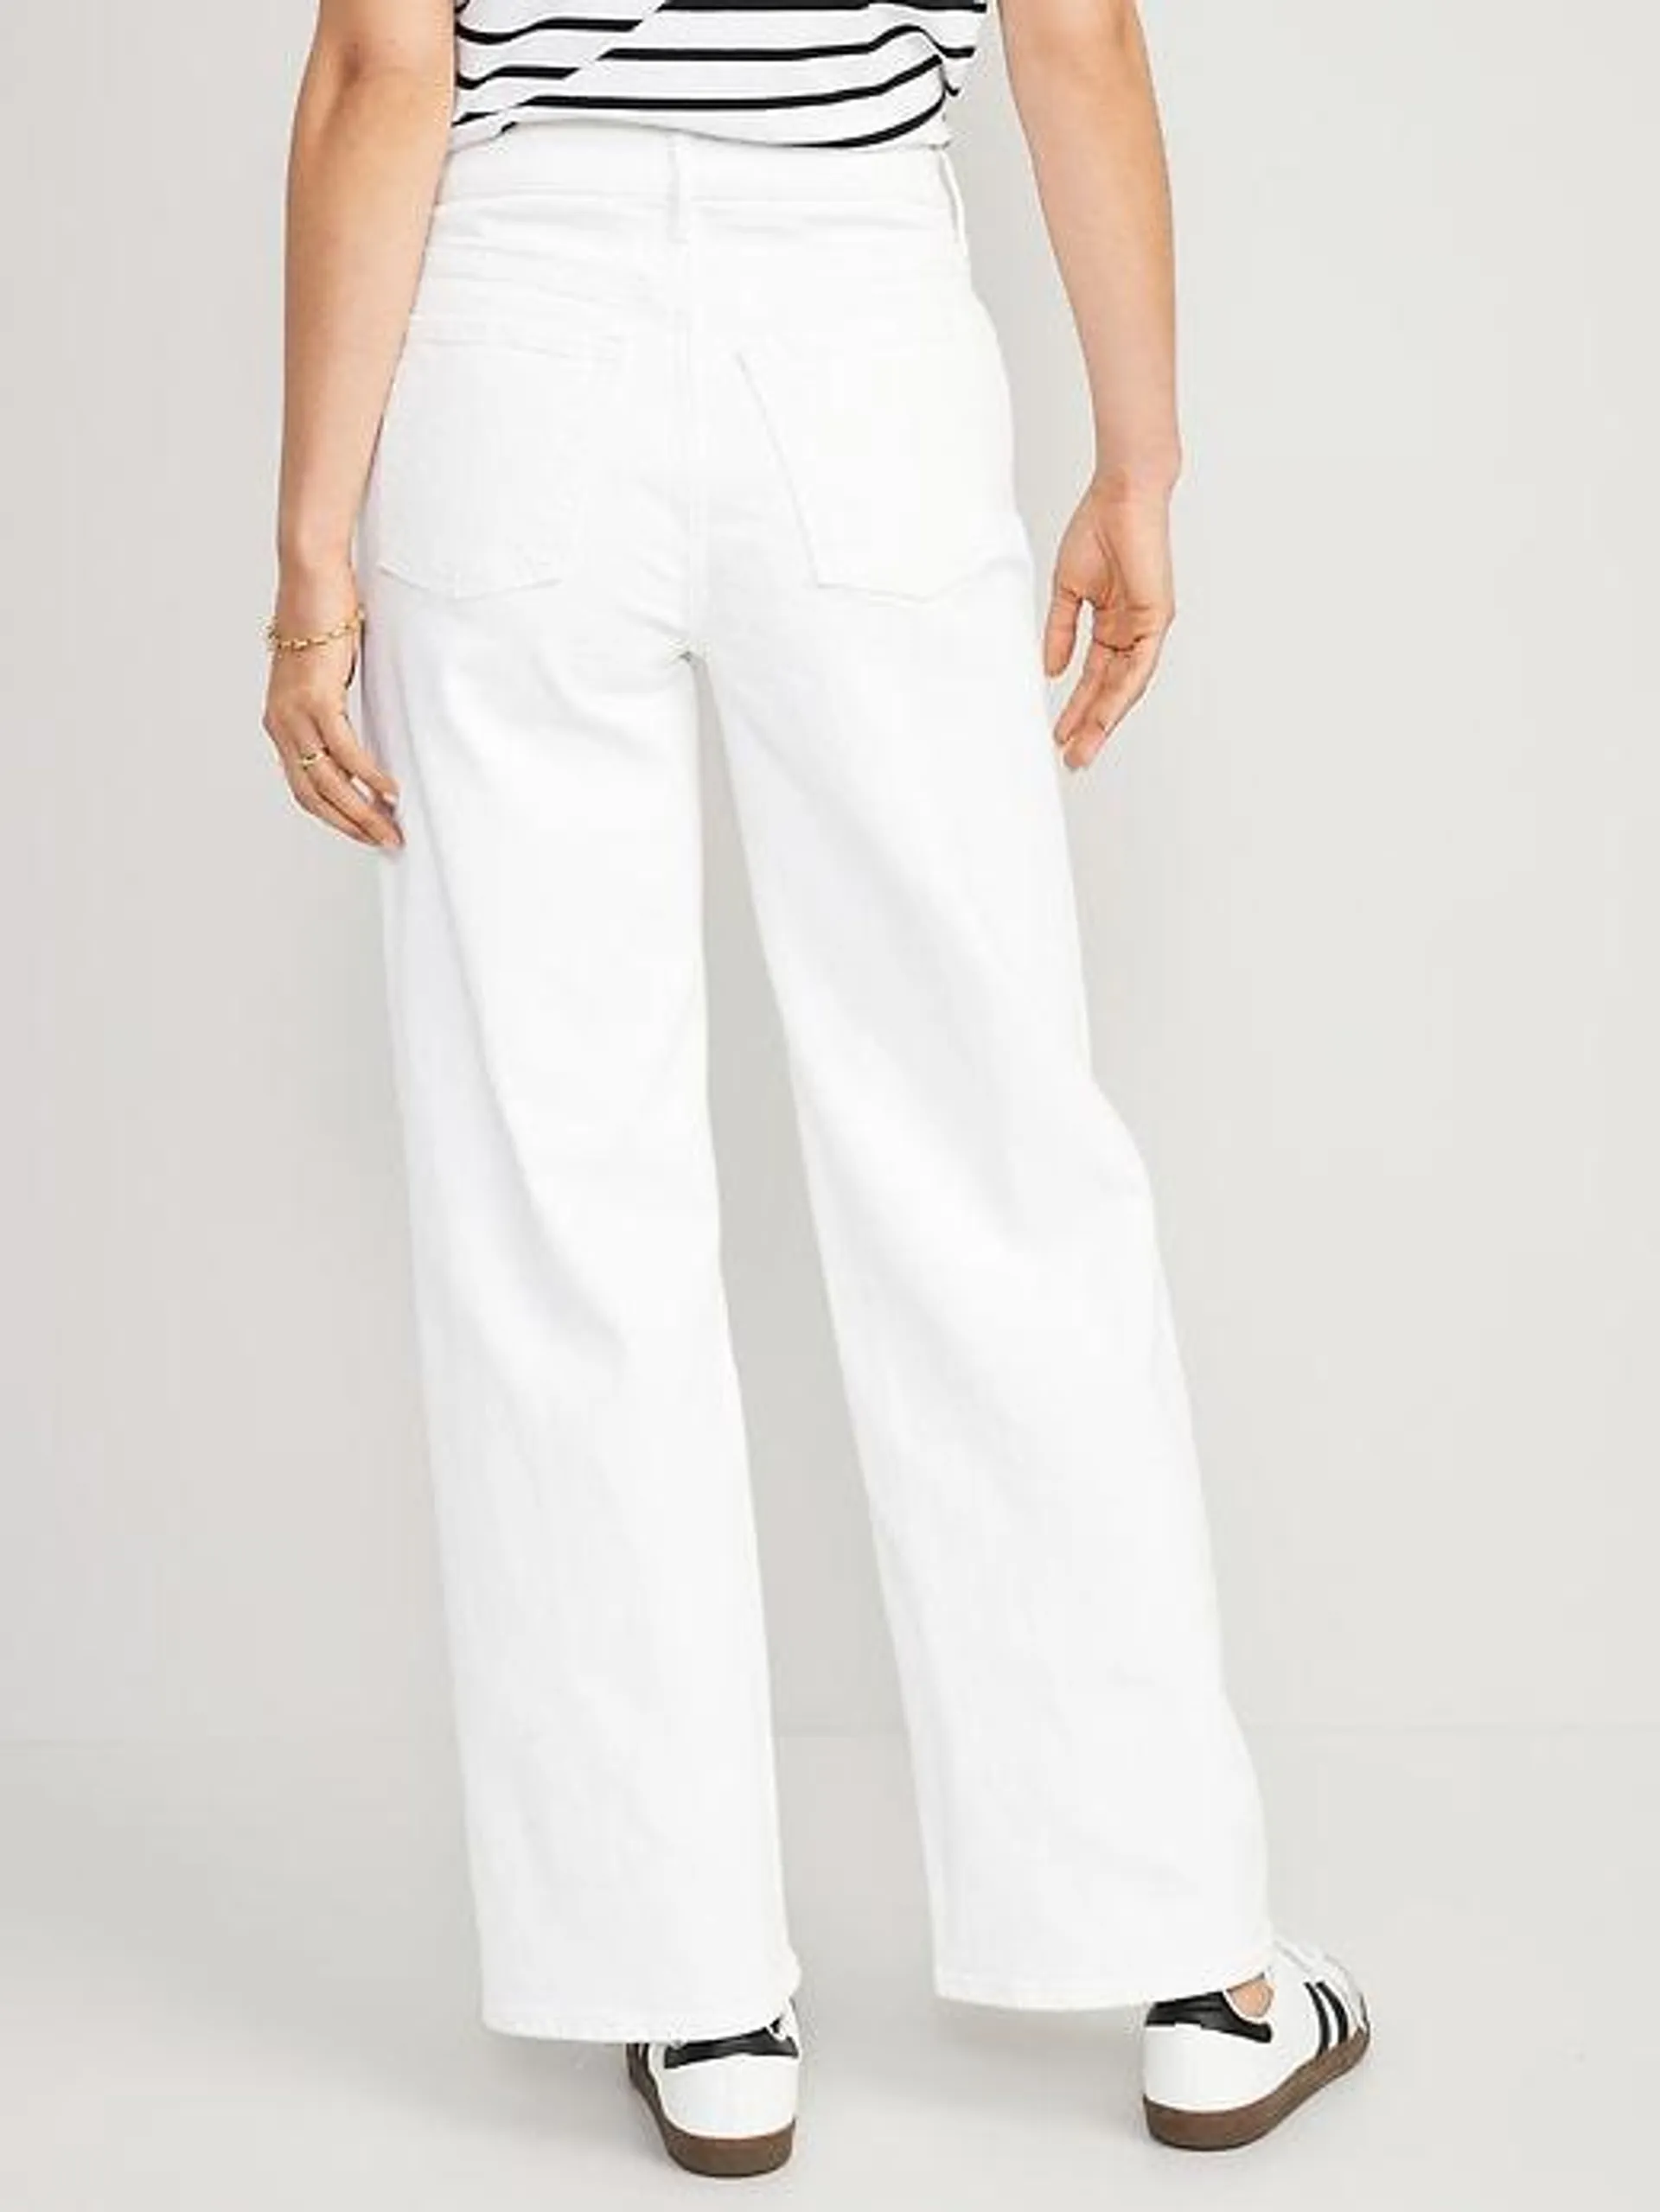 Extra High-Waisted Wide Leg Cut-Off White Jeans for Women